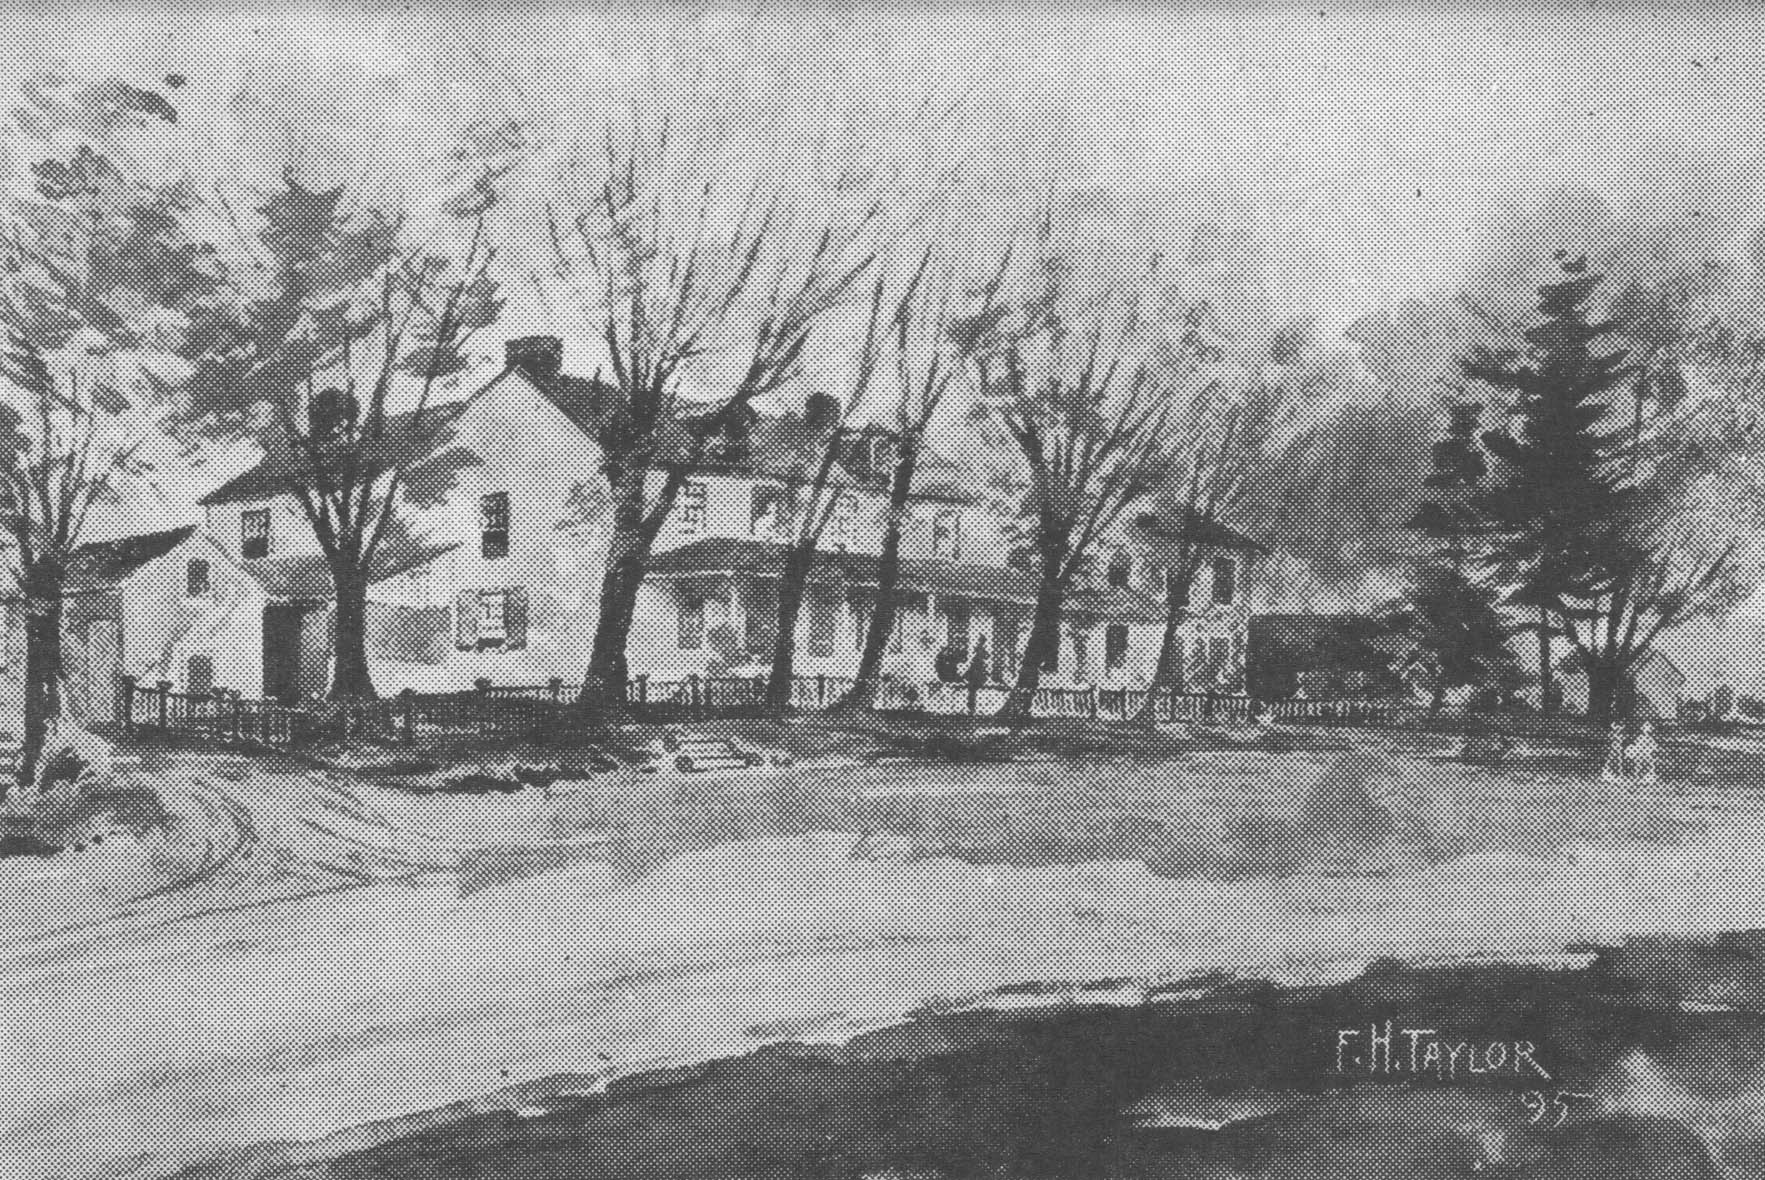 painting of the post office, a large white building set in the woods with a fence around it.